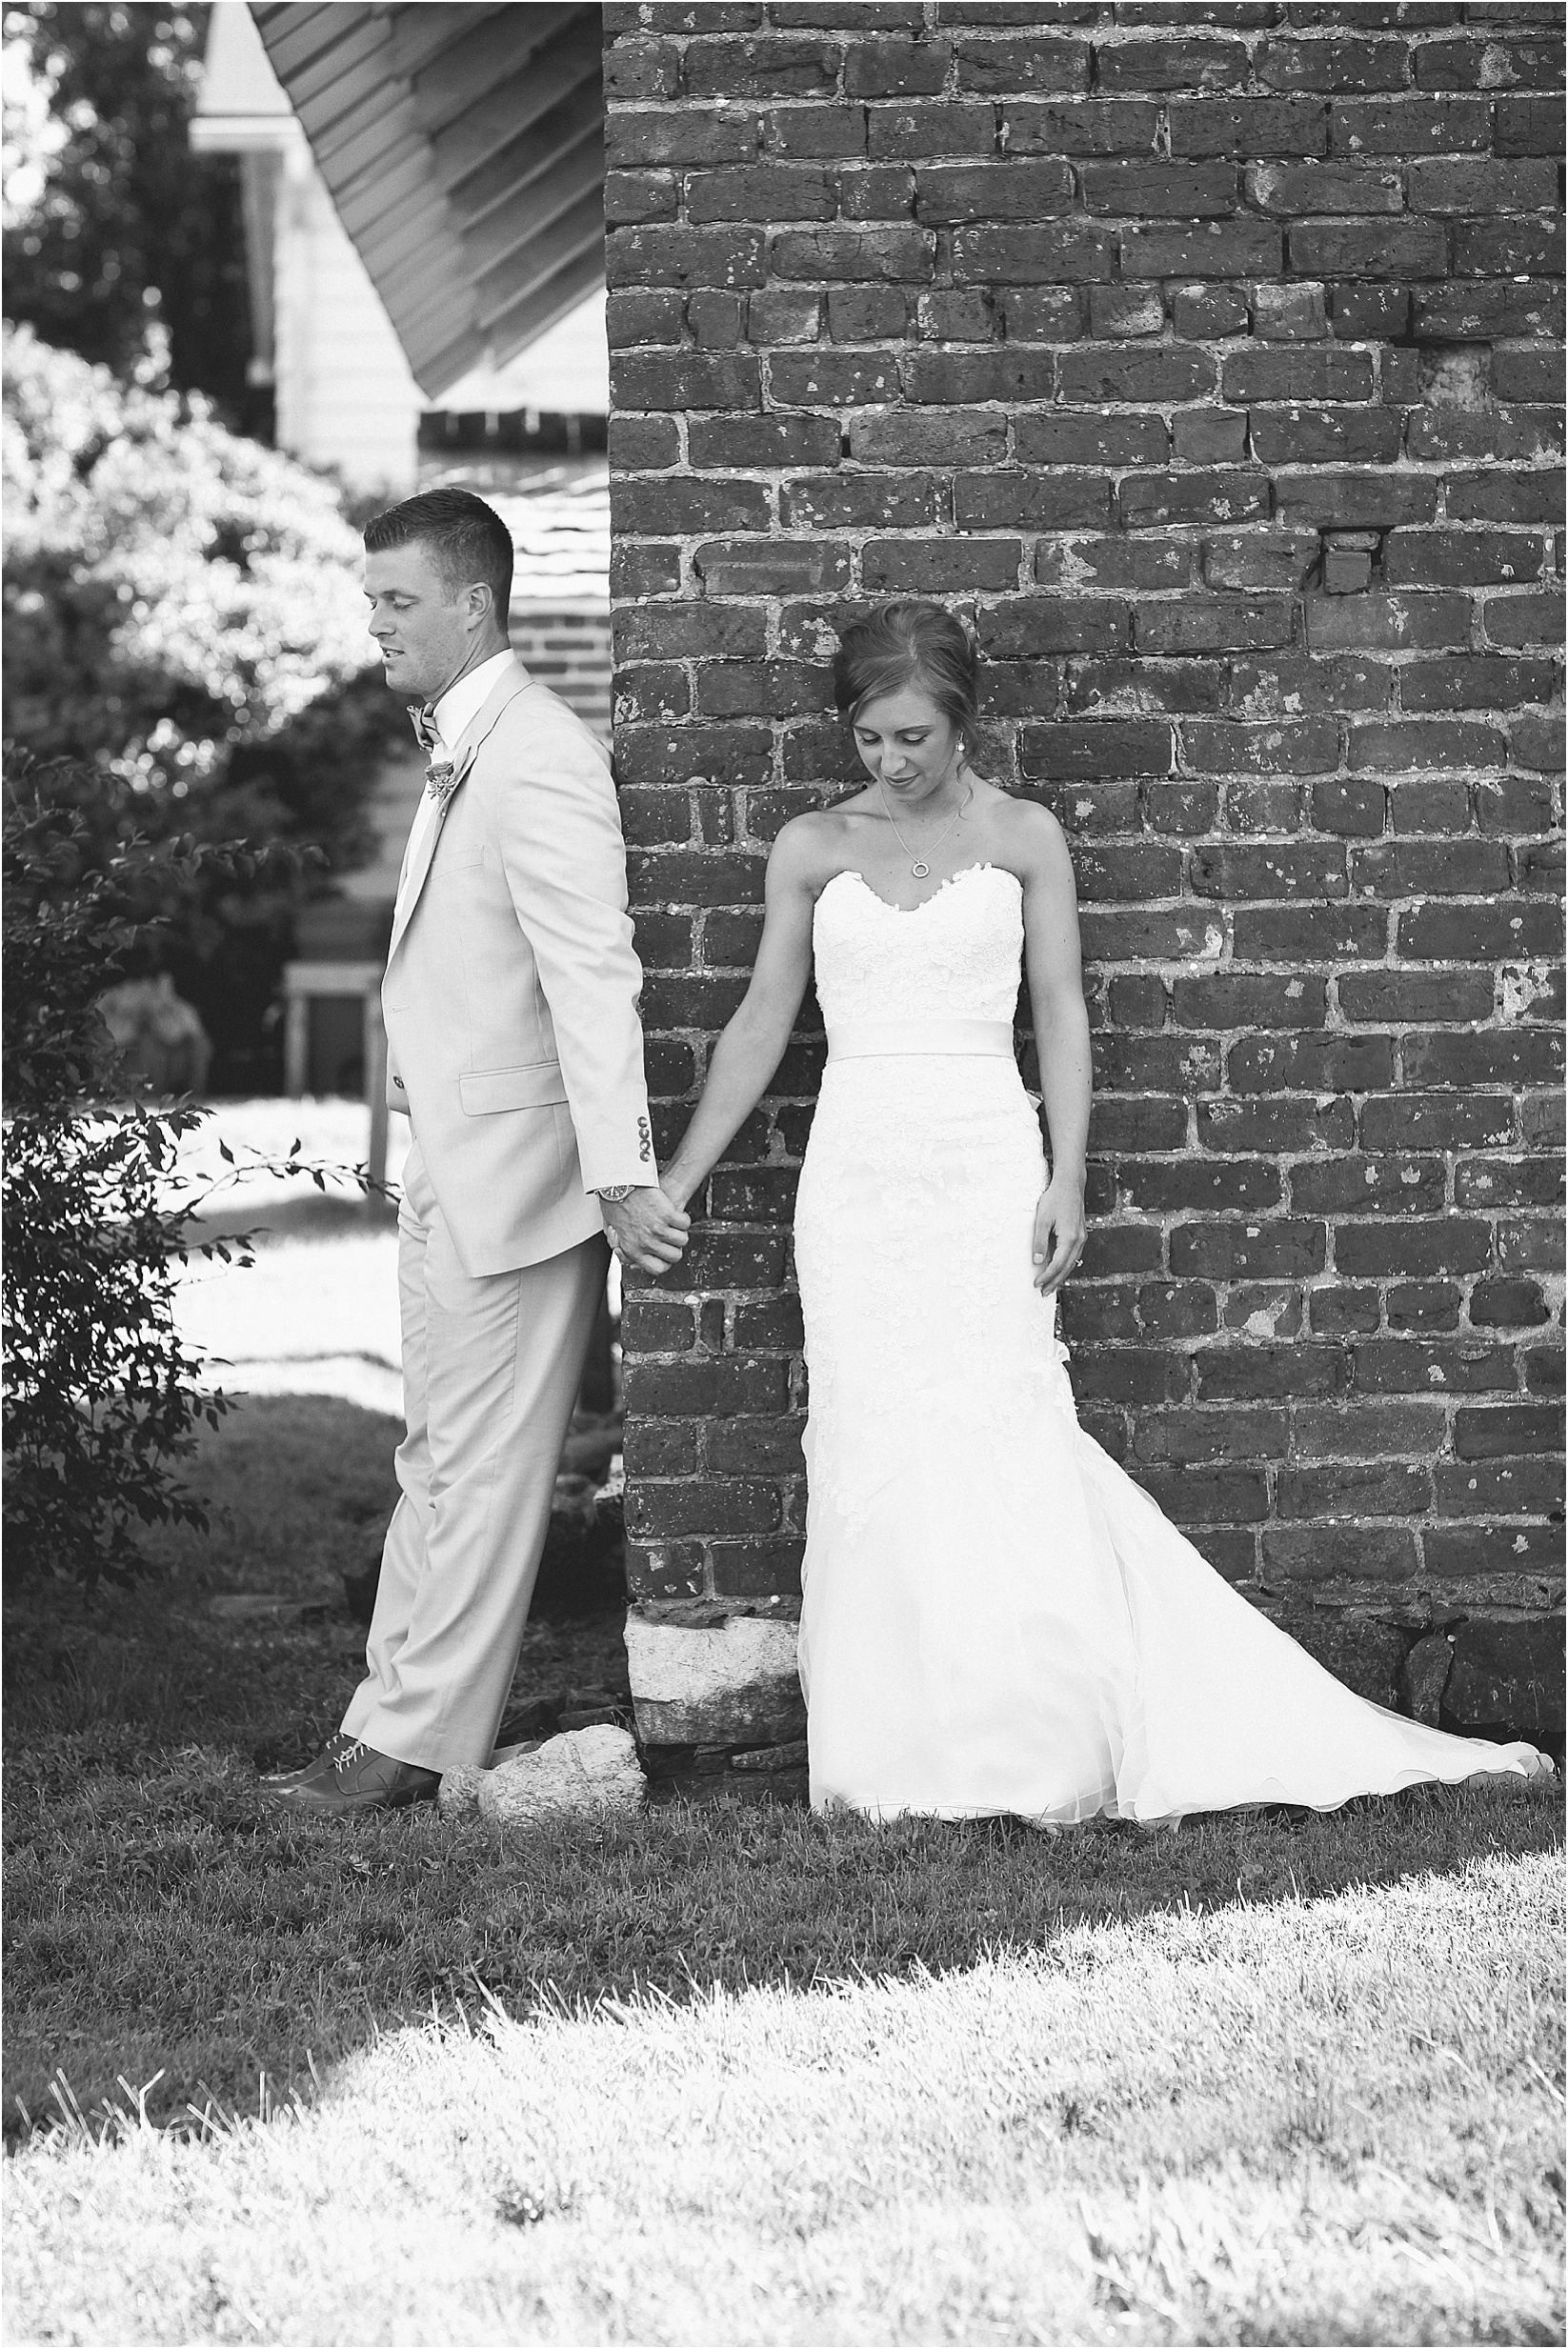 praying holding hands around the corner during their wedding at the Historic Rural Hill wedding ceremony and reception in Huntersville nc